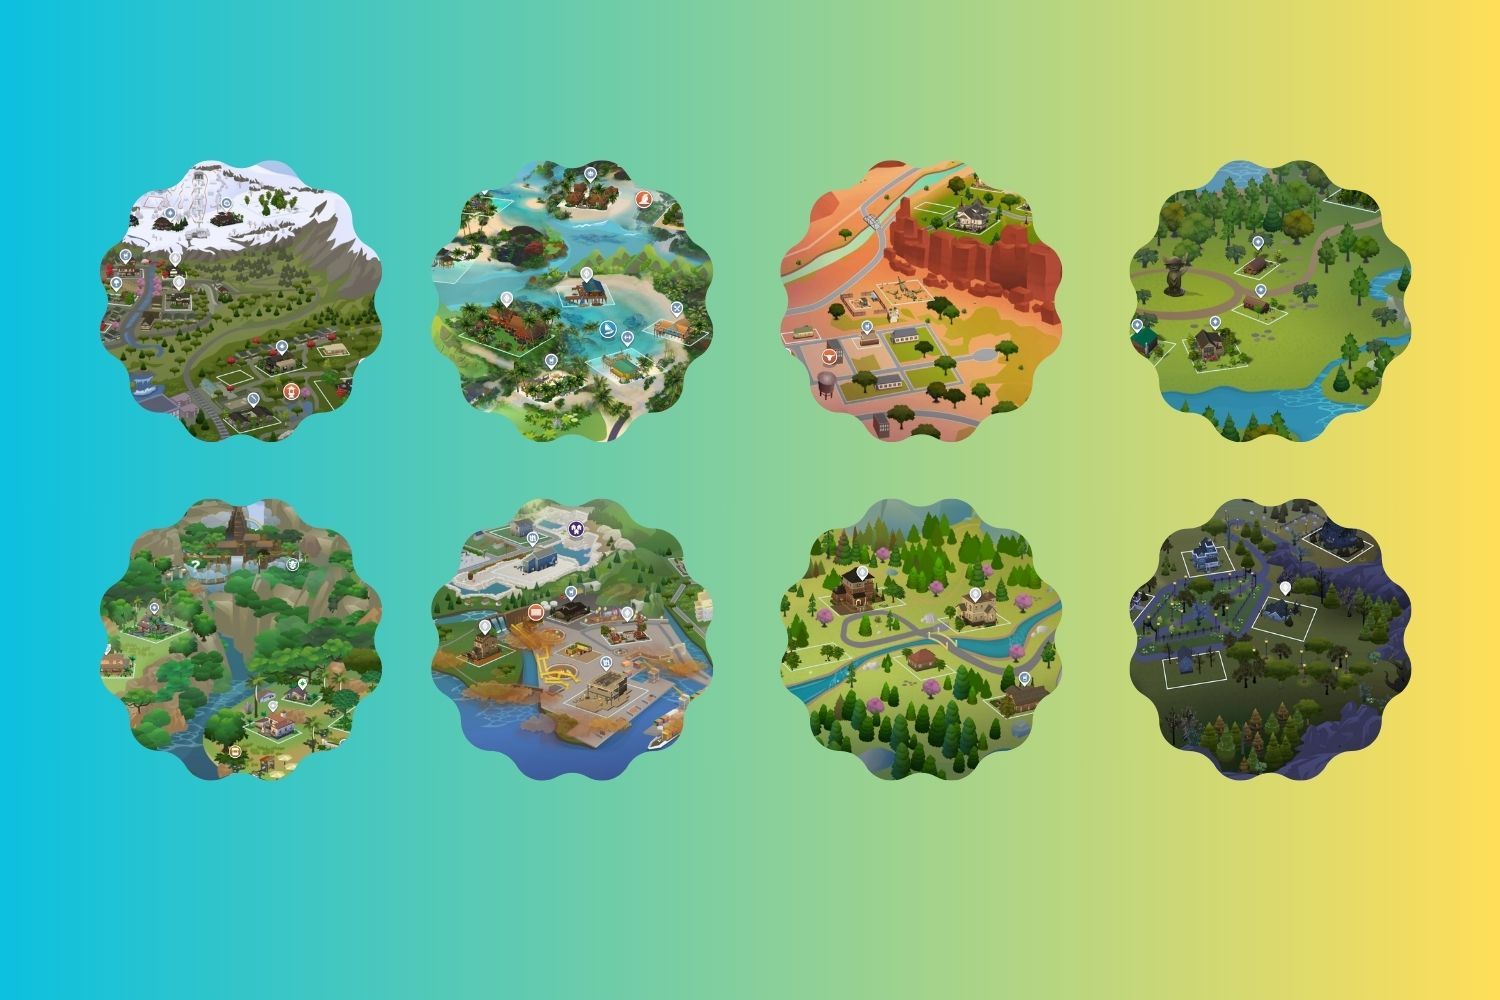 Eight icons show the maps of Mt. Komorebi, Sulani, Strangerville, Granite Falls, Selvadorada, Evergreen Harbor, Glimmerbrook, and Forgotten Hollow